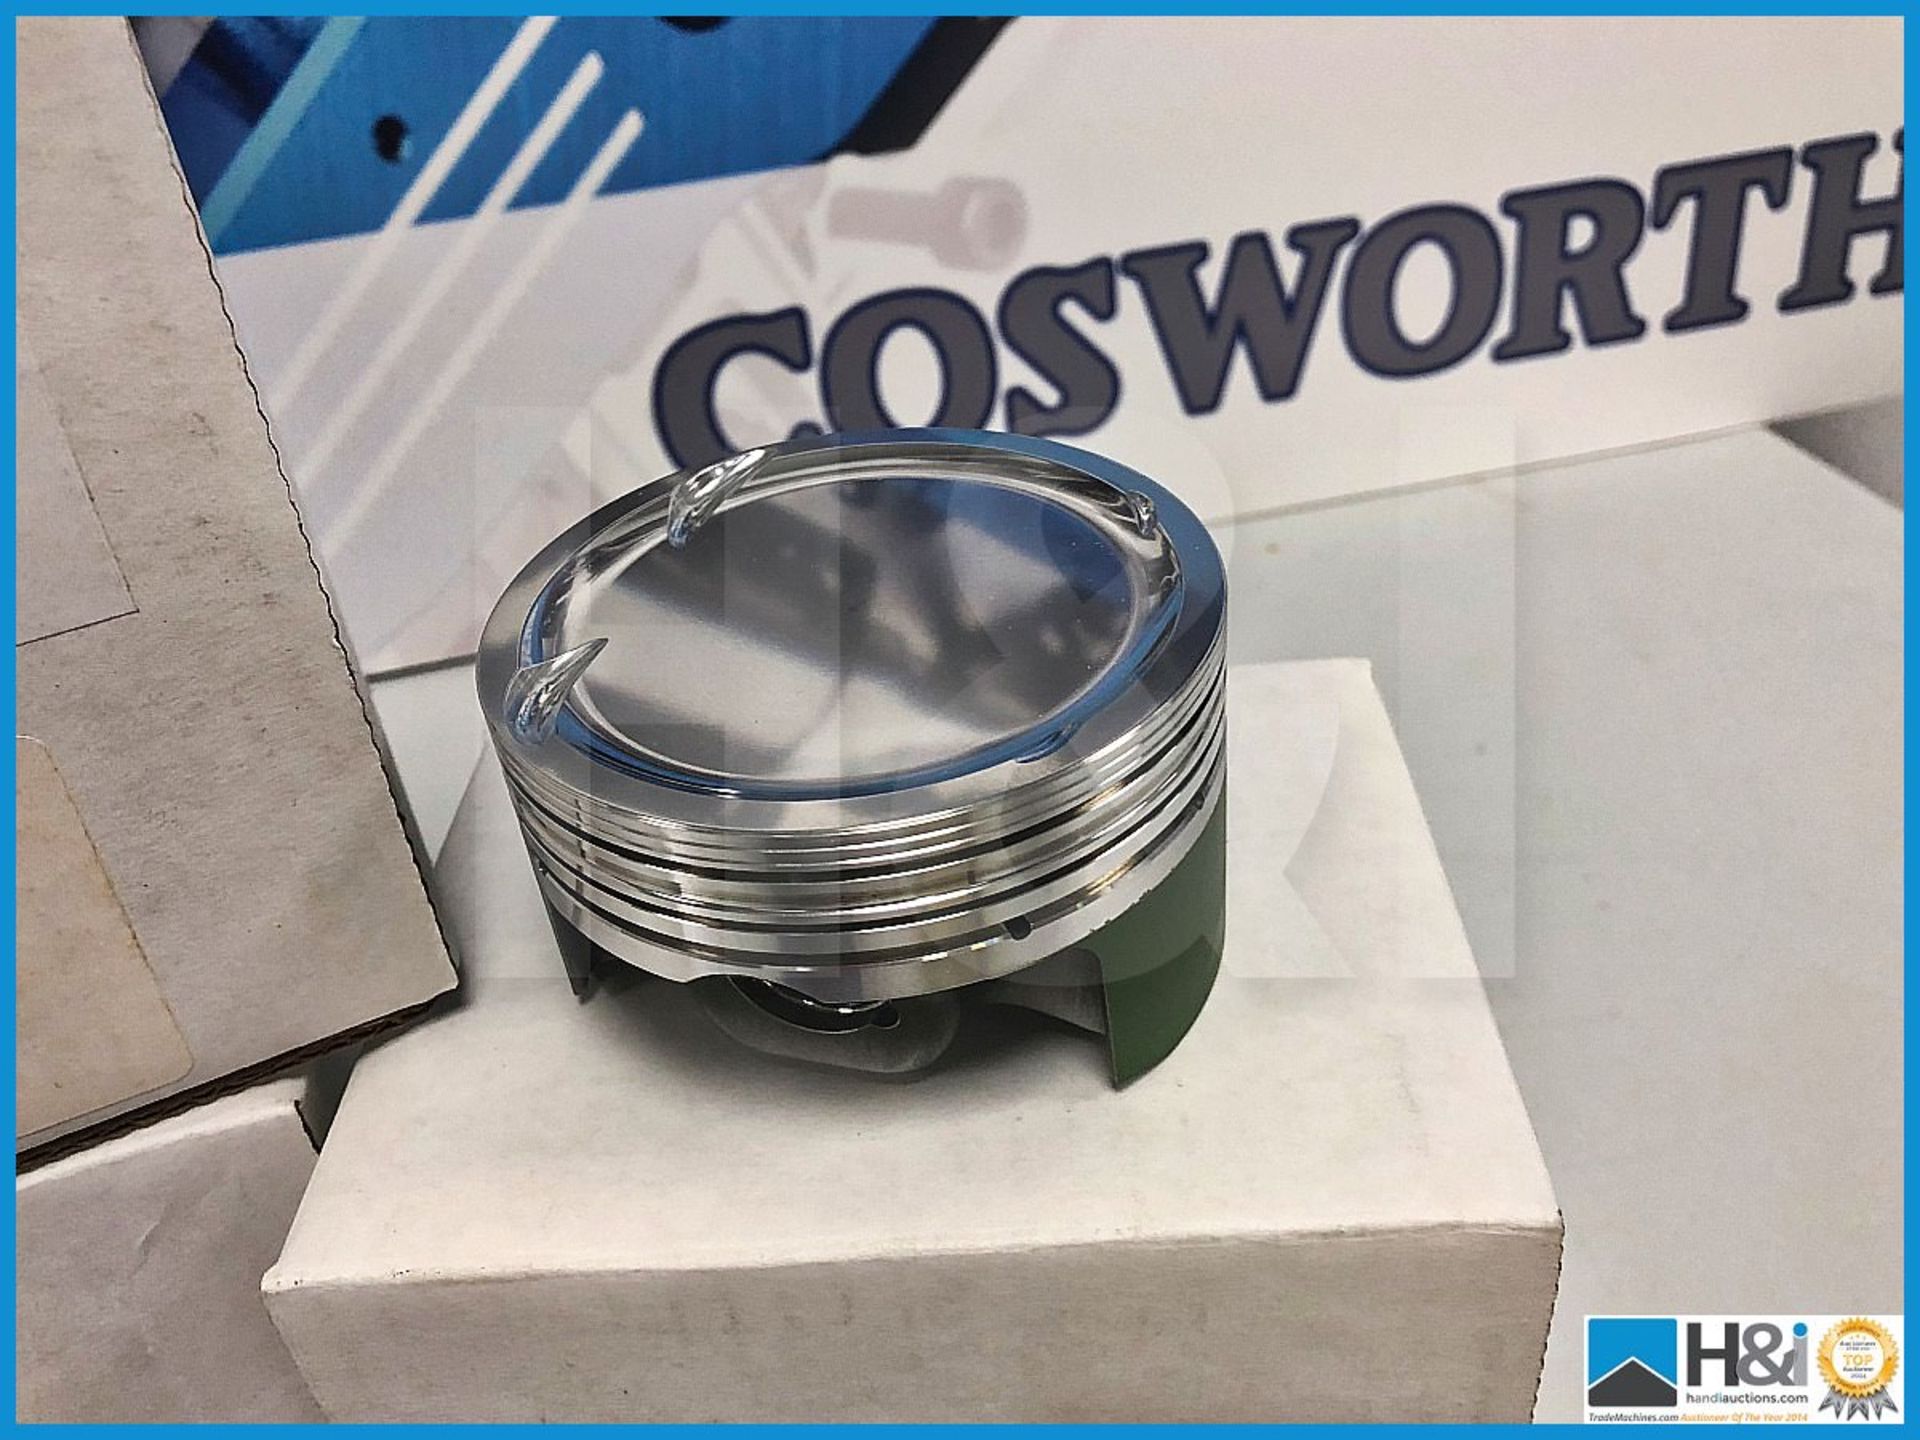 3 x Cosworth piston, pin and clip kit 86.5mm stroker. Code: 20005784 - Image 2 of 3